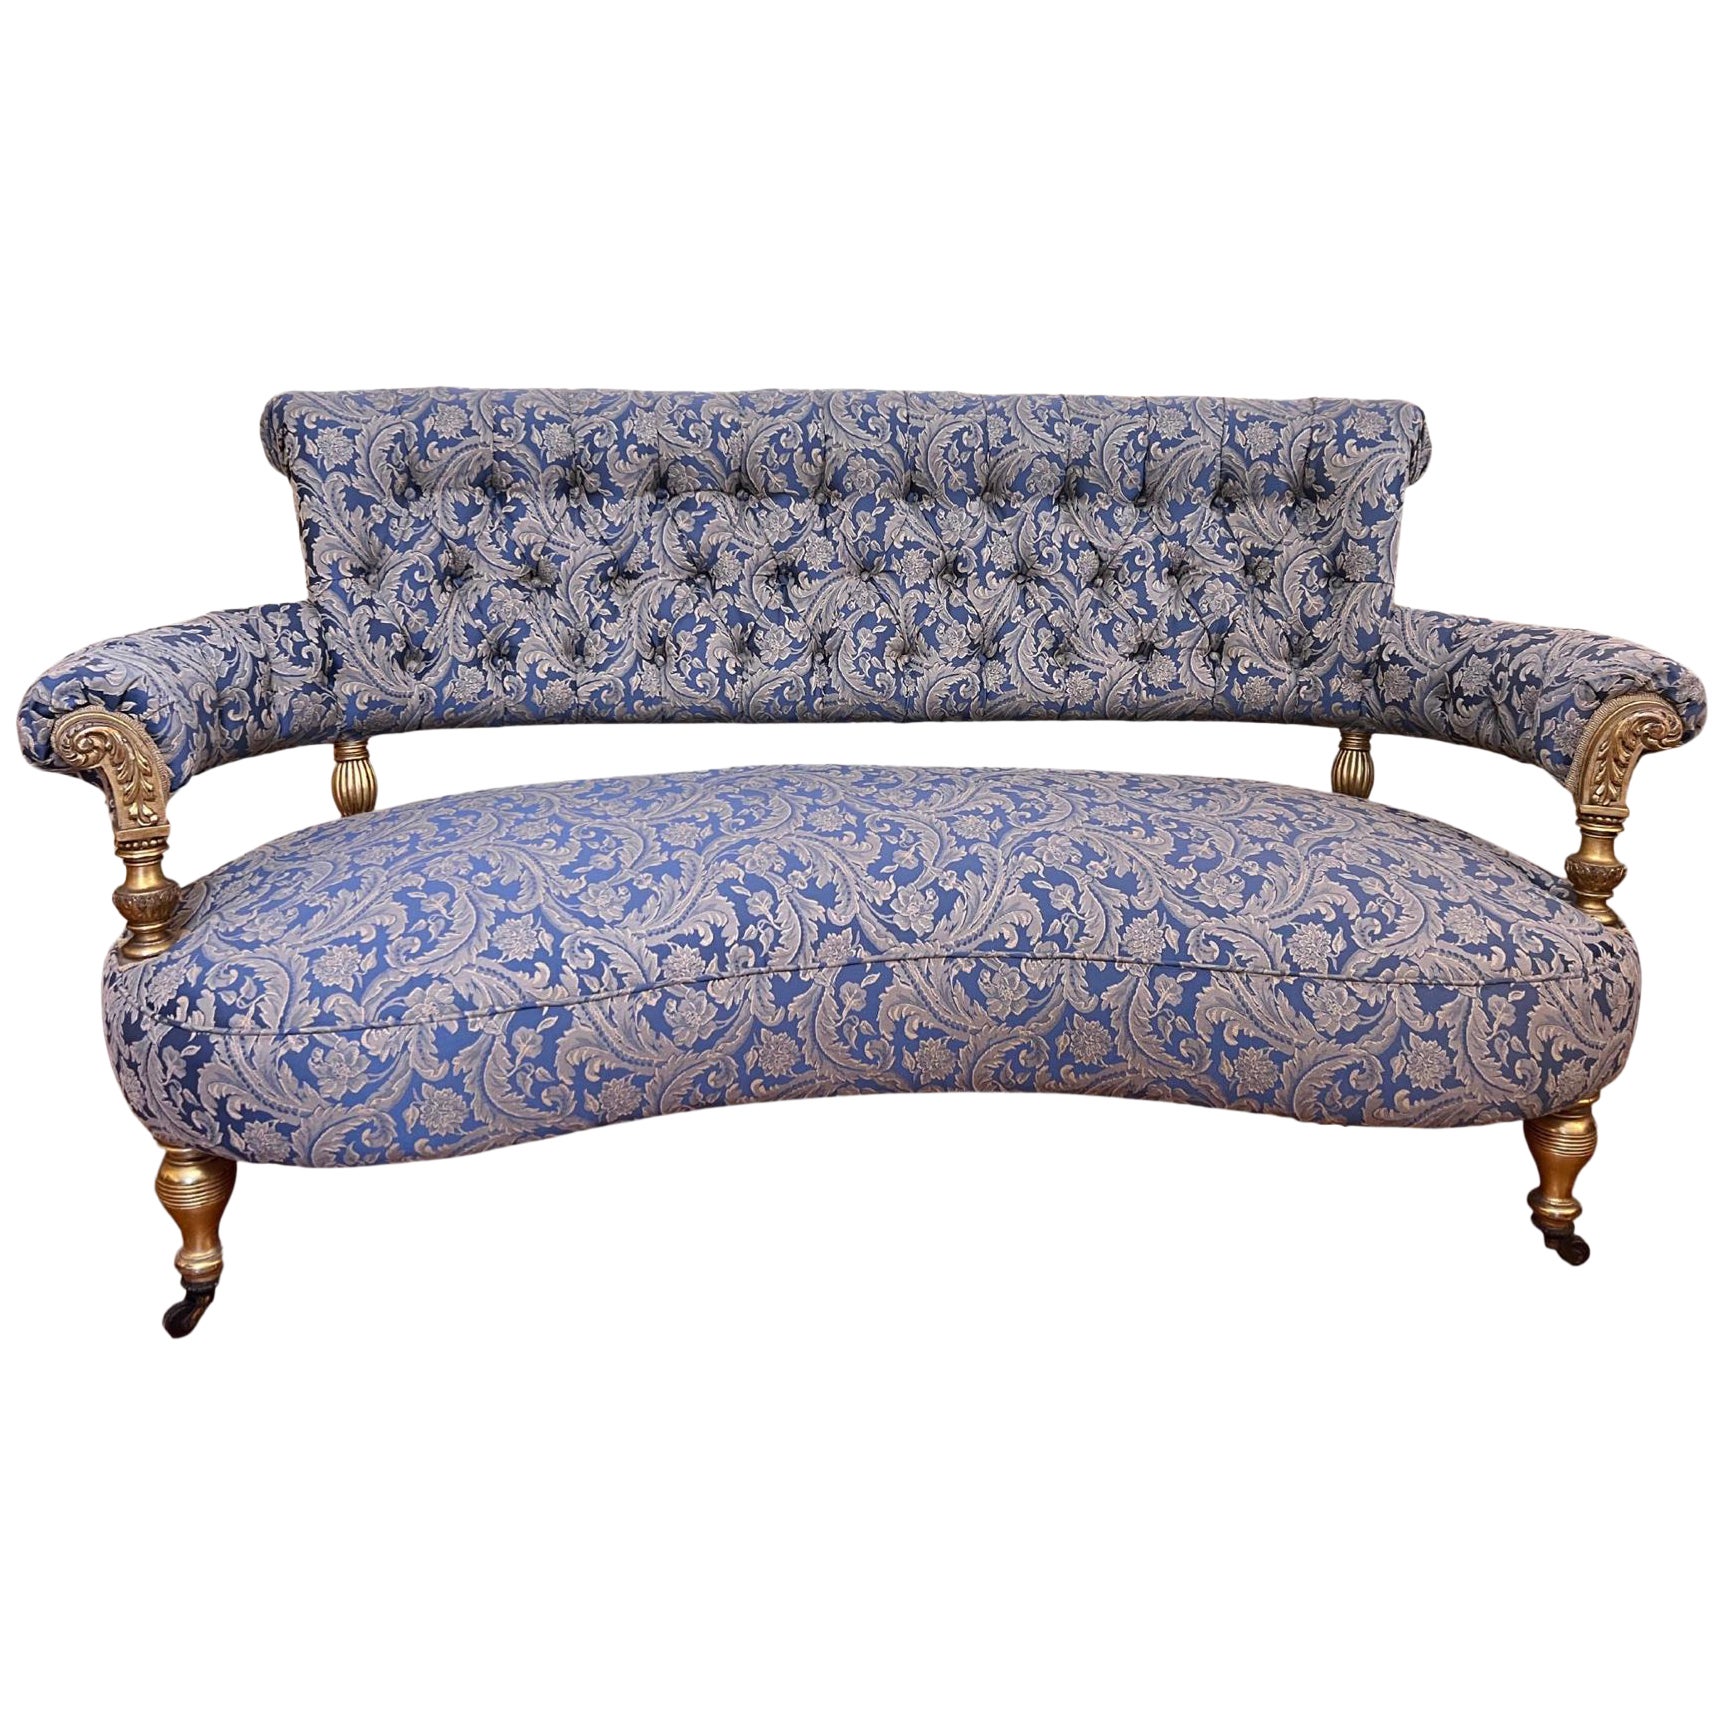 Antique French Gold Gilt & Brocade Fabric Settee Chaise Lounge For Sale